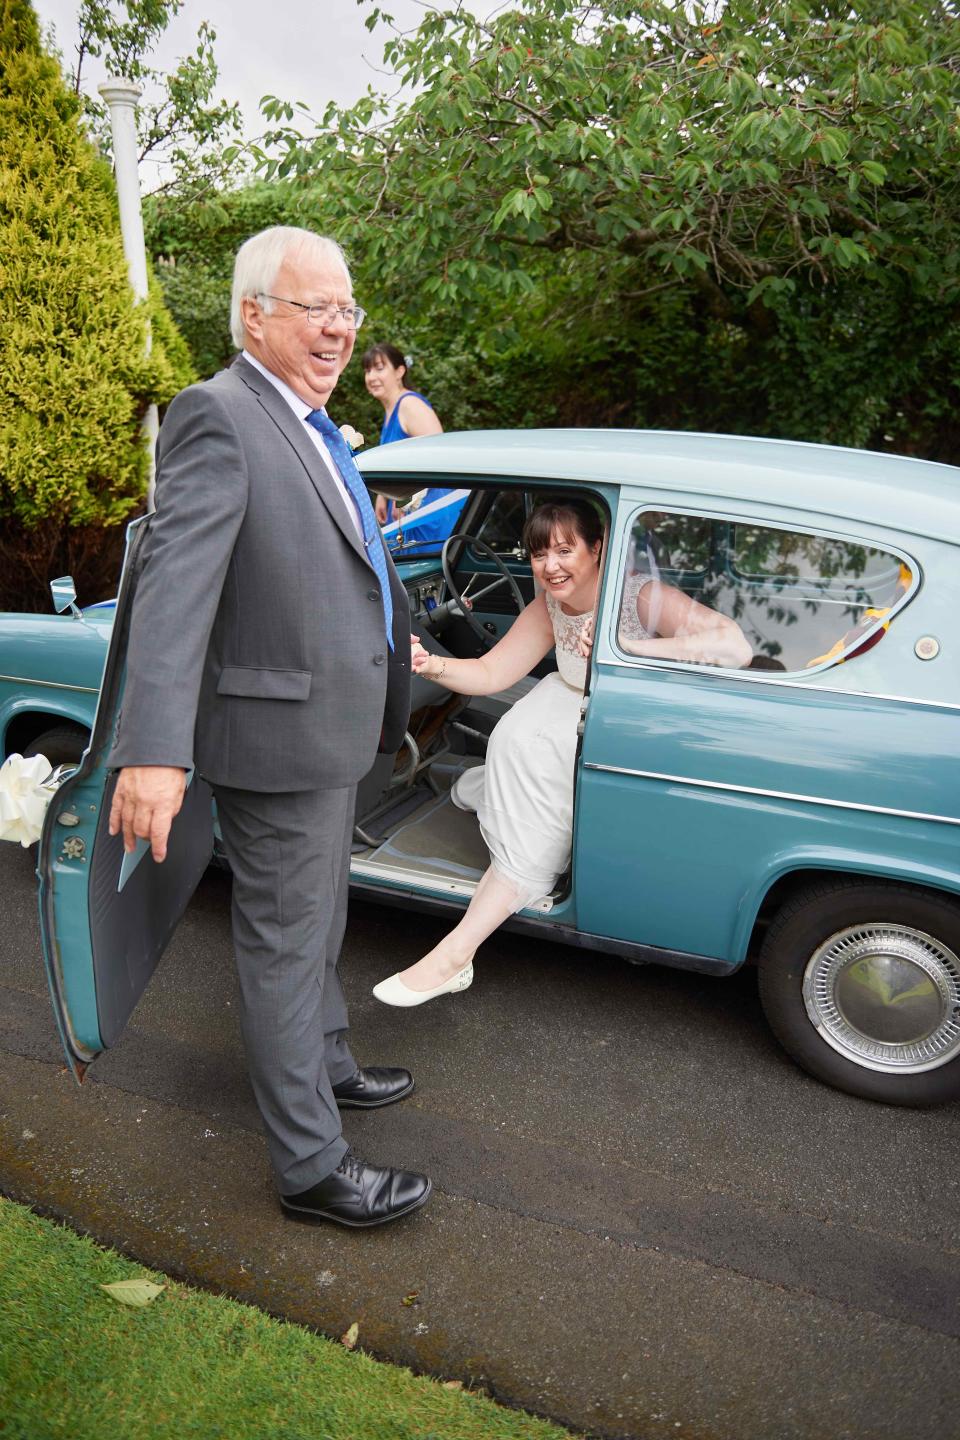 Amy Fieldhouse-Downes and her father, pictured with her Harry Potter wedding car. (Matthew Sier)